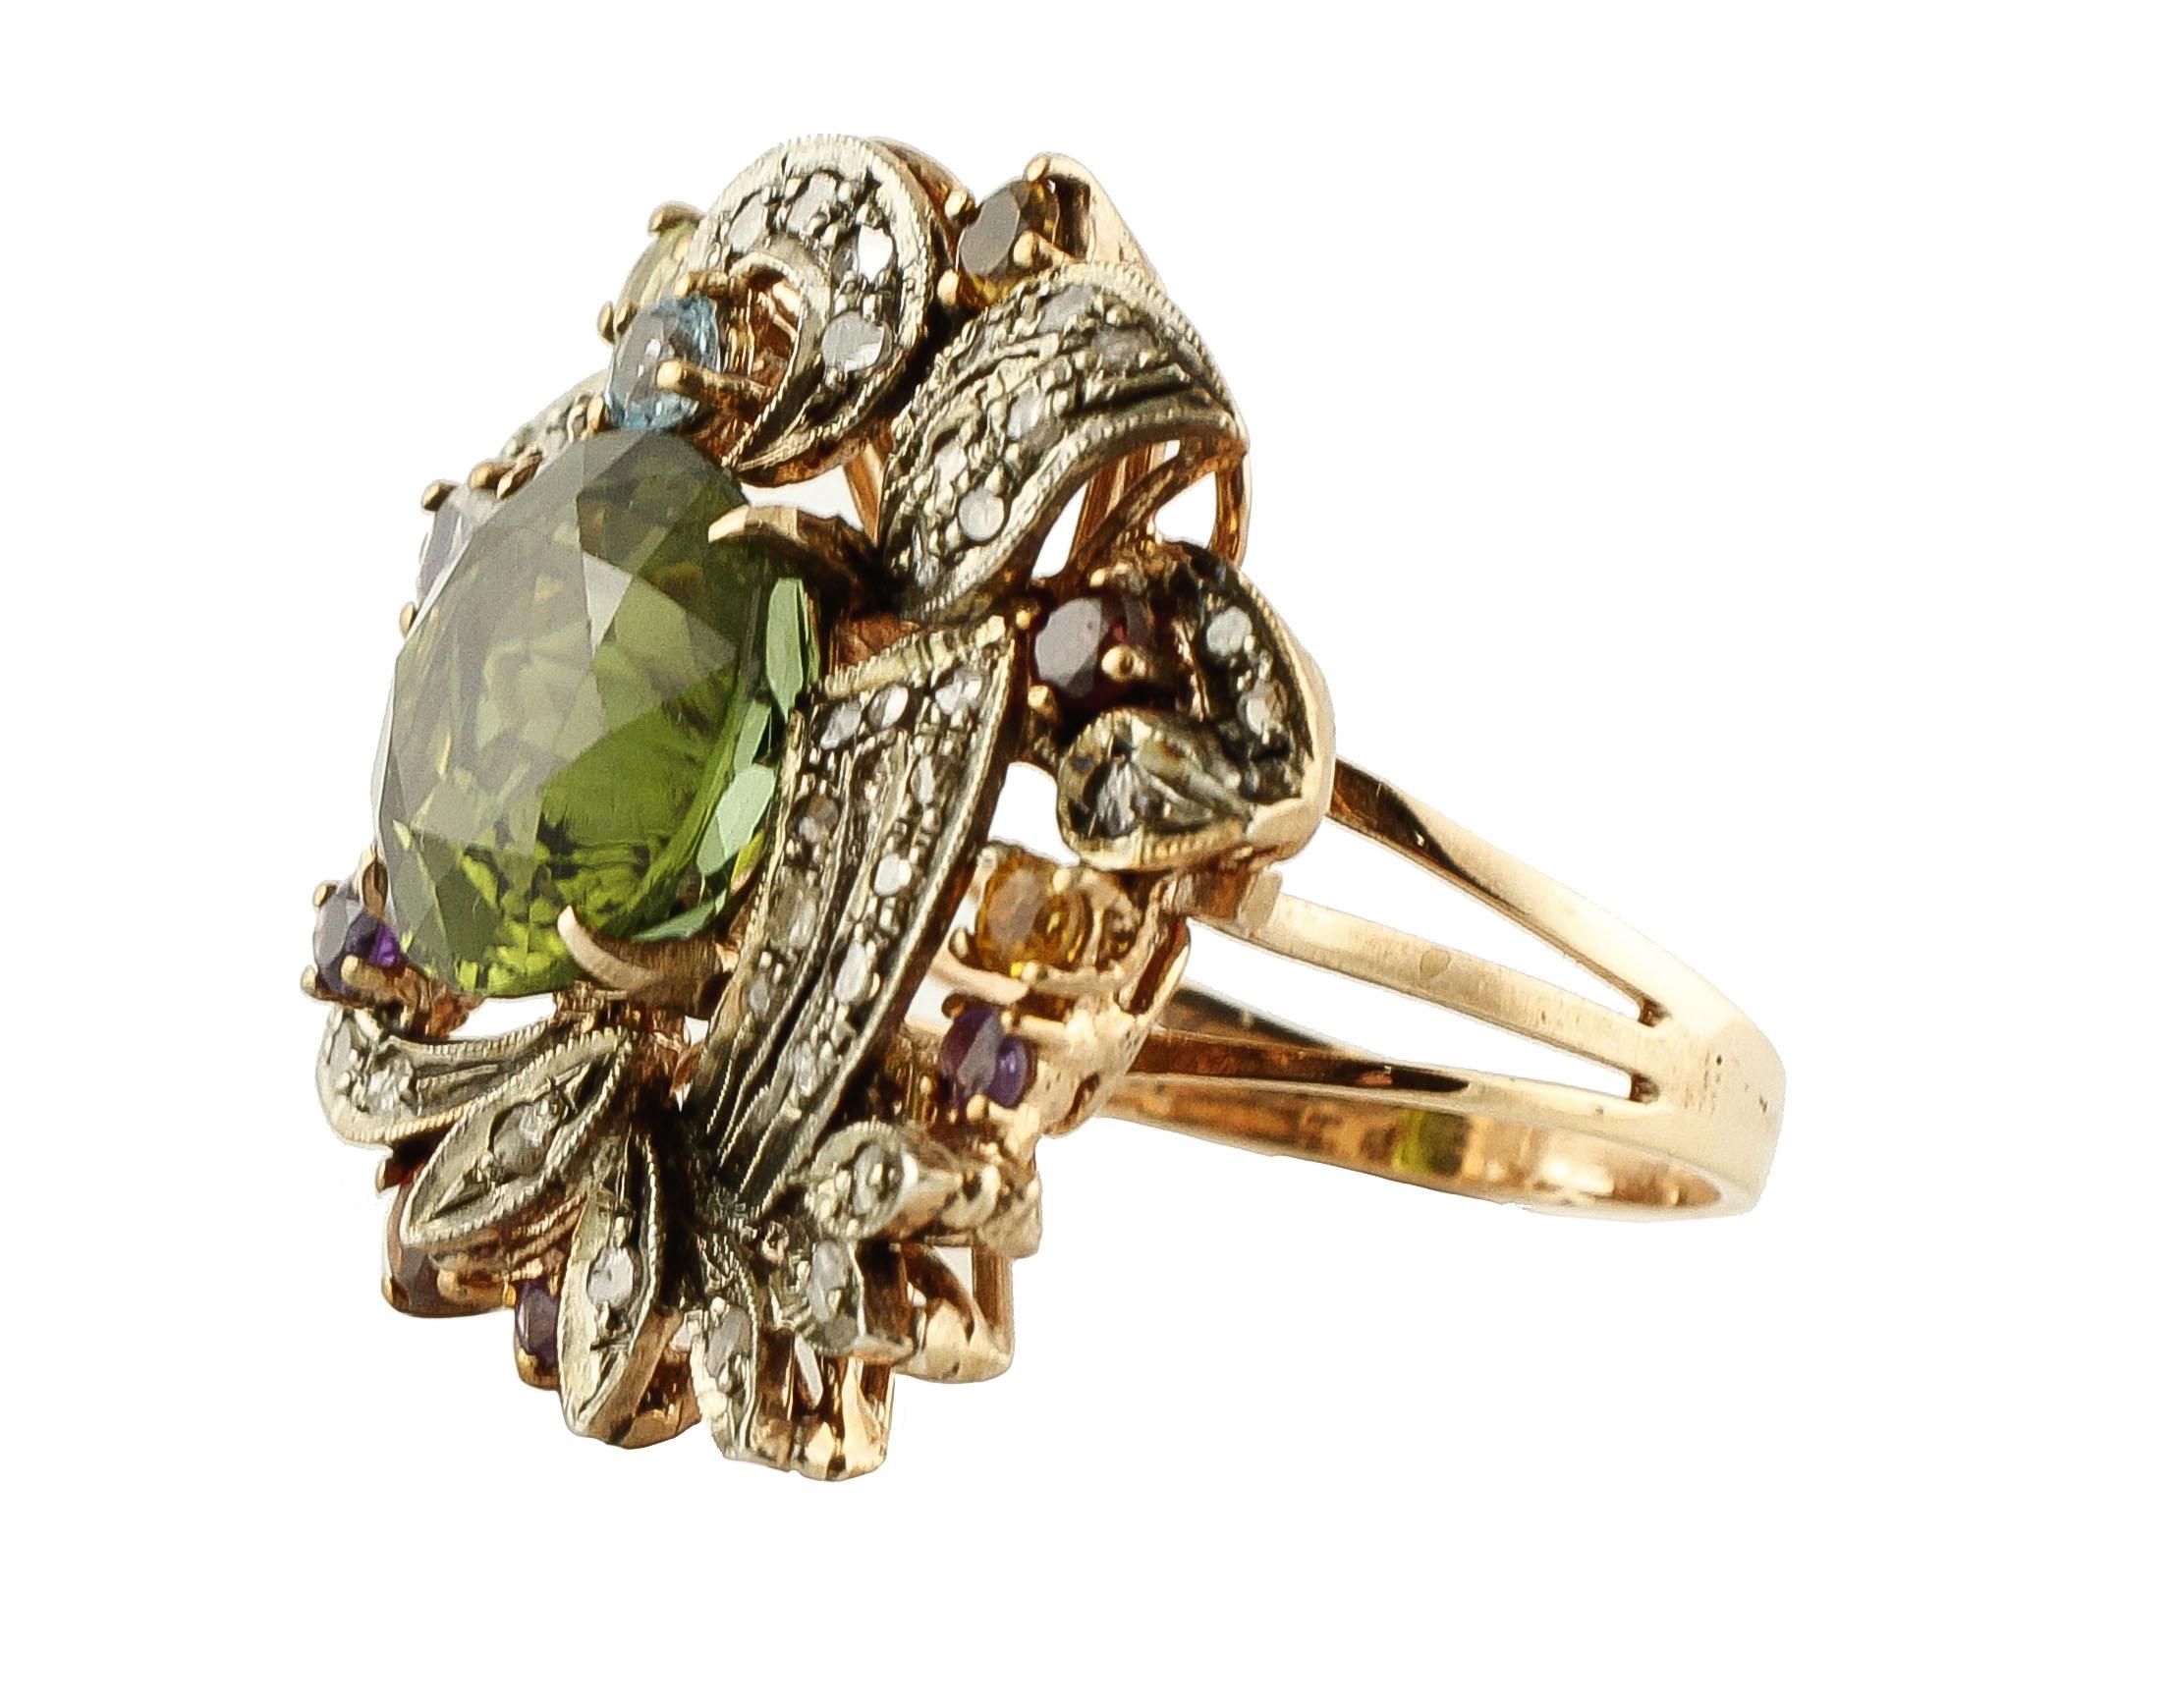 Fabulous cluster ring in 9K rose gold and silver ring mounted with deep color green tourmaline (12 mm X 12 mm) in the center surrounded by leaves detailes studded by little rose cut diamonds, and adorned with yellow and light blue topazes, pink